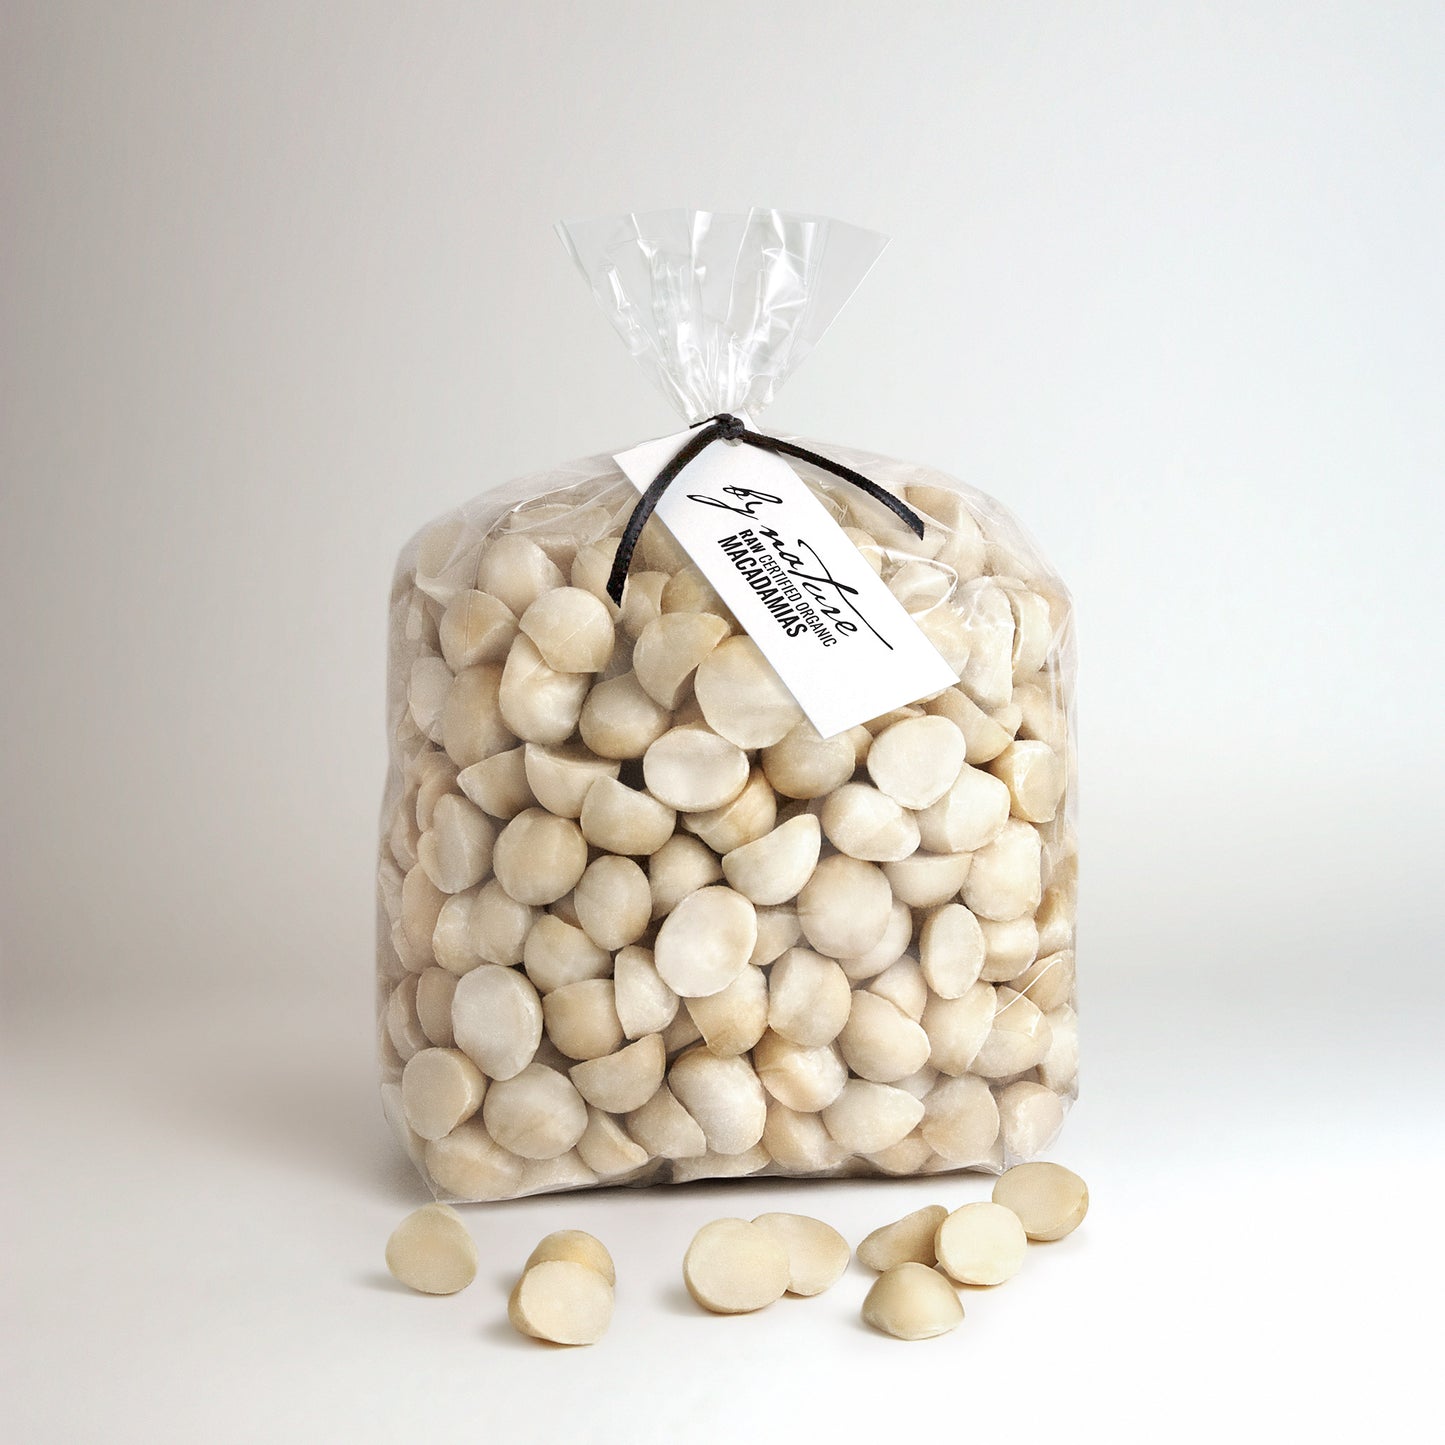 BY NATURE Macadamia Nuts, 1kg - certified organic at source, raw.